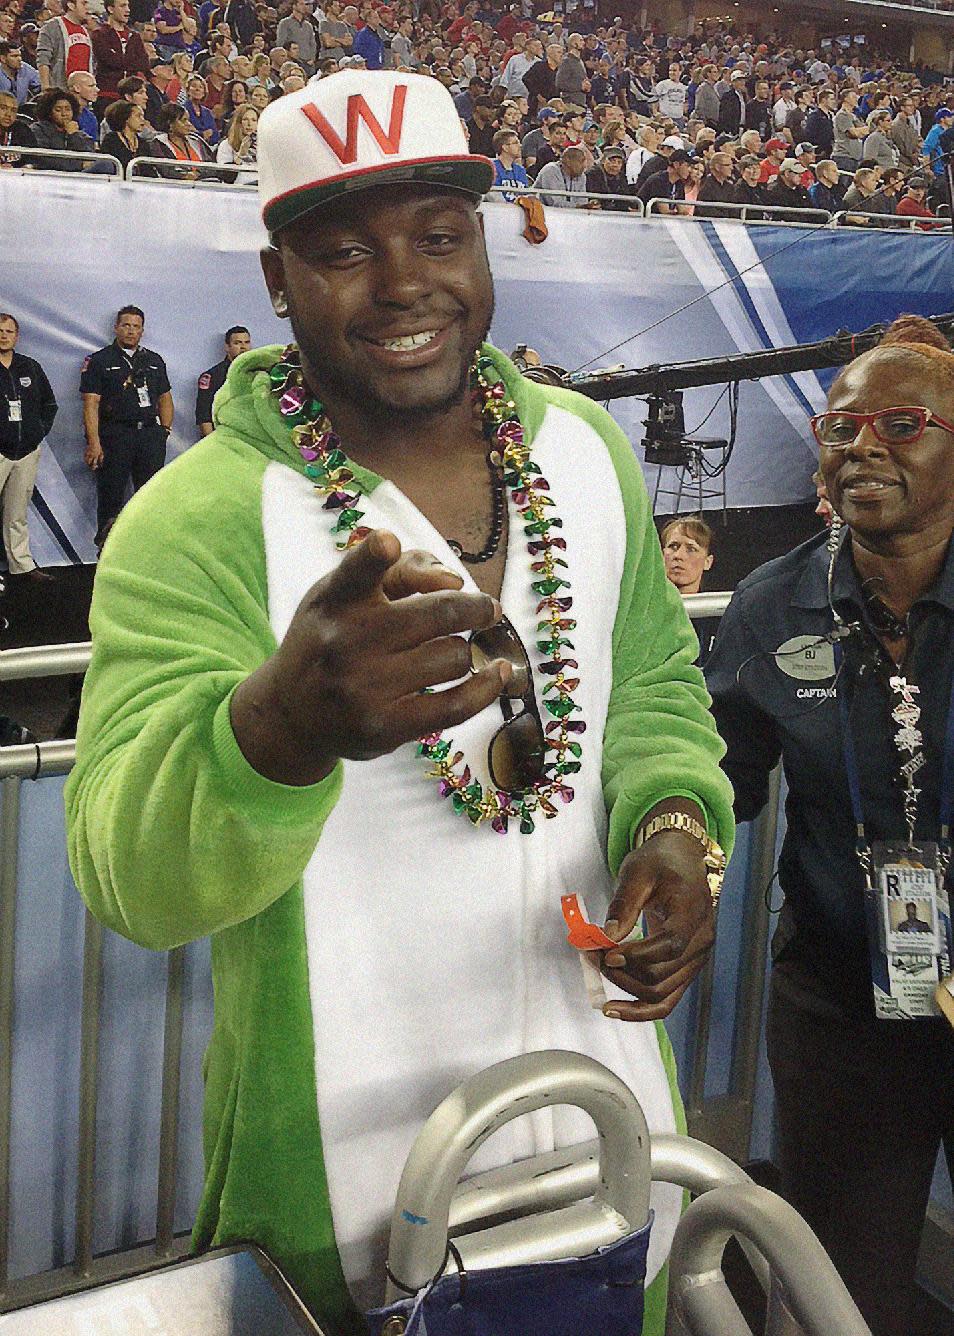 Denver Broncos running back Montee Ball smiles during the NCAA Final Four tournament college basketball semifinal game between Wisconsin and Kentucky Saturday, April 5, 2014, in Arlington, Texas. (AP Photo/Mark Long)